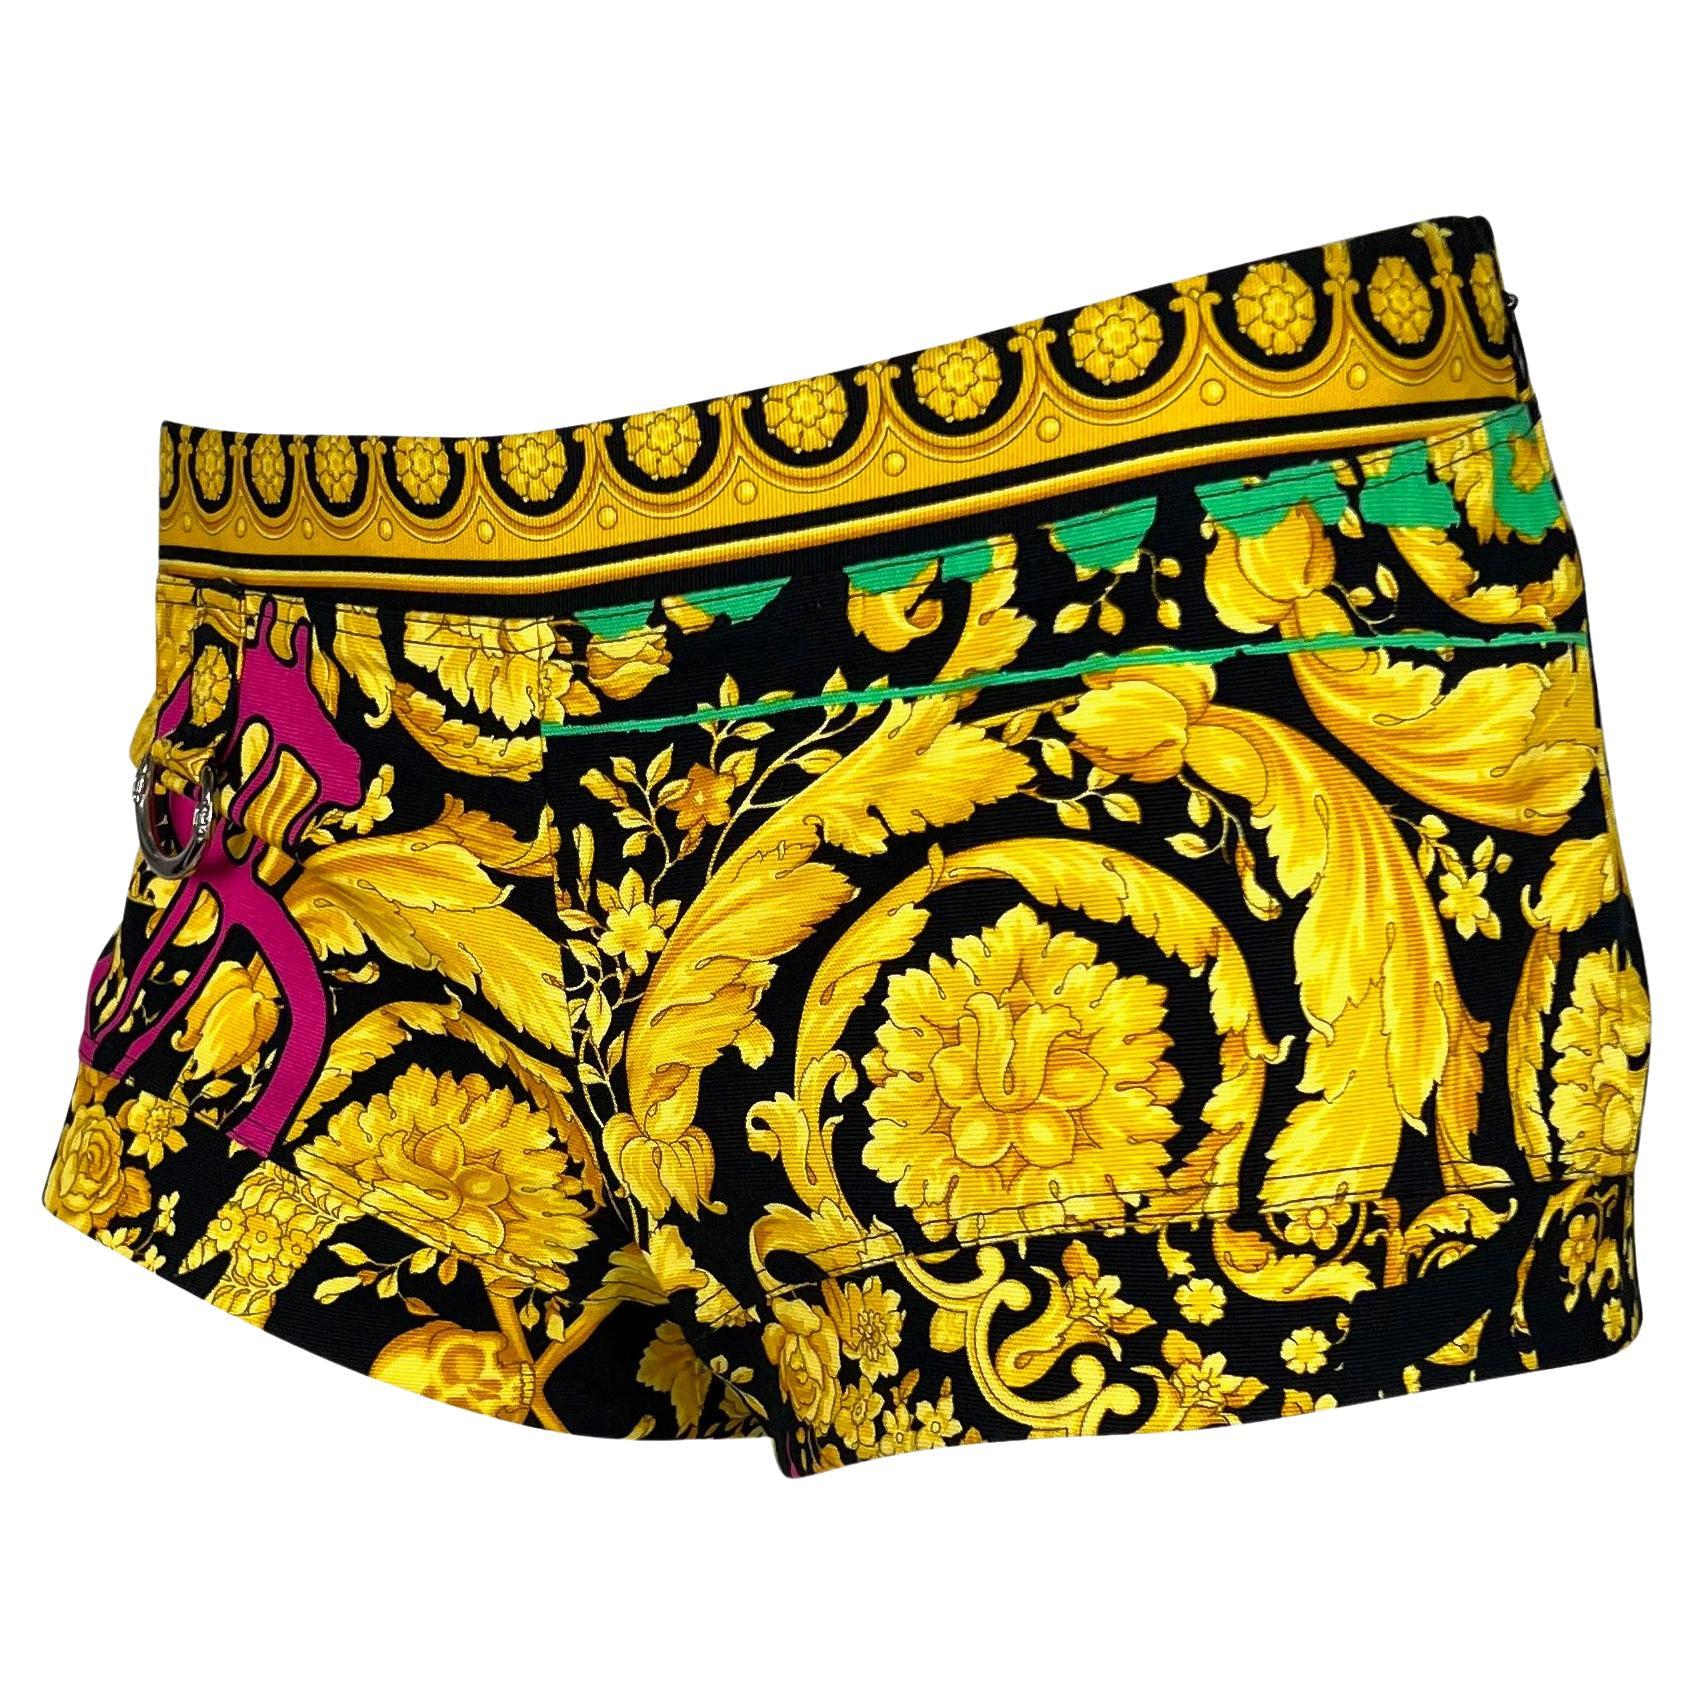 Presenting a pair of baroque Versace shorts, designed by Donatella Versace. From the Spring/Summer 2005 collection, these Choas Couture mini shorts boast the brand's famous gold and black baroque pattern. Donatella reimagined this print outfitting